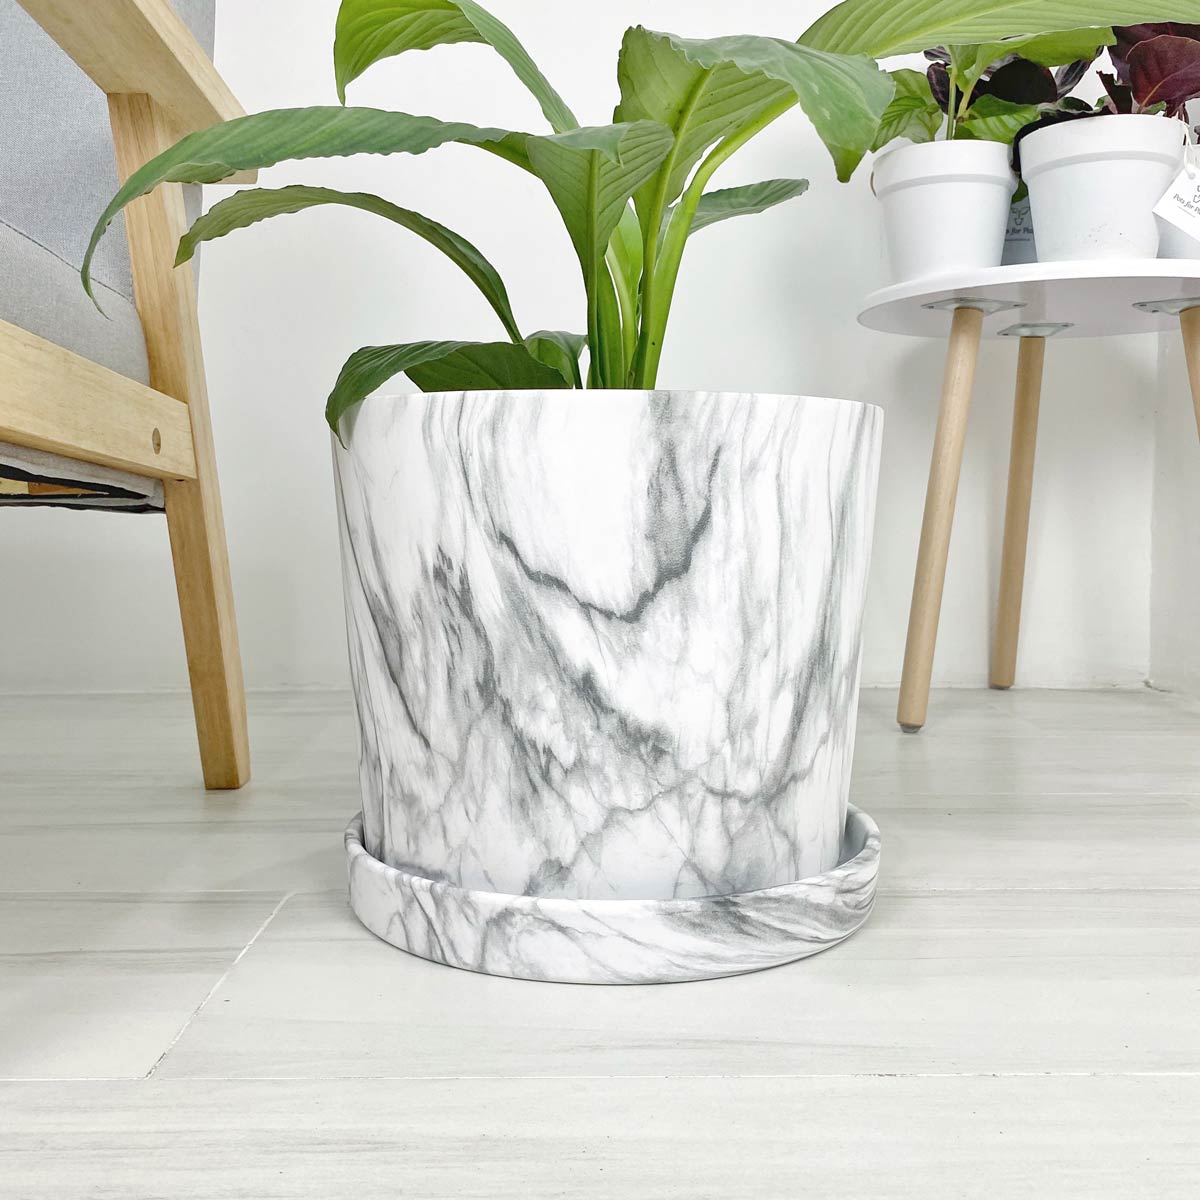 Marbled Ceramic Floor Planter with Catchplate - Pots For Plants